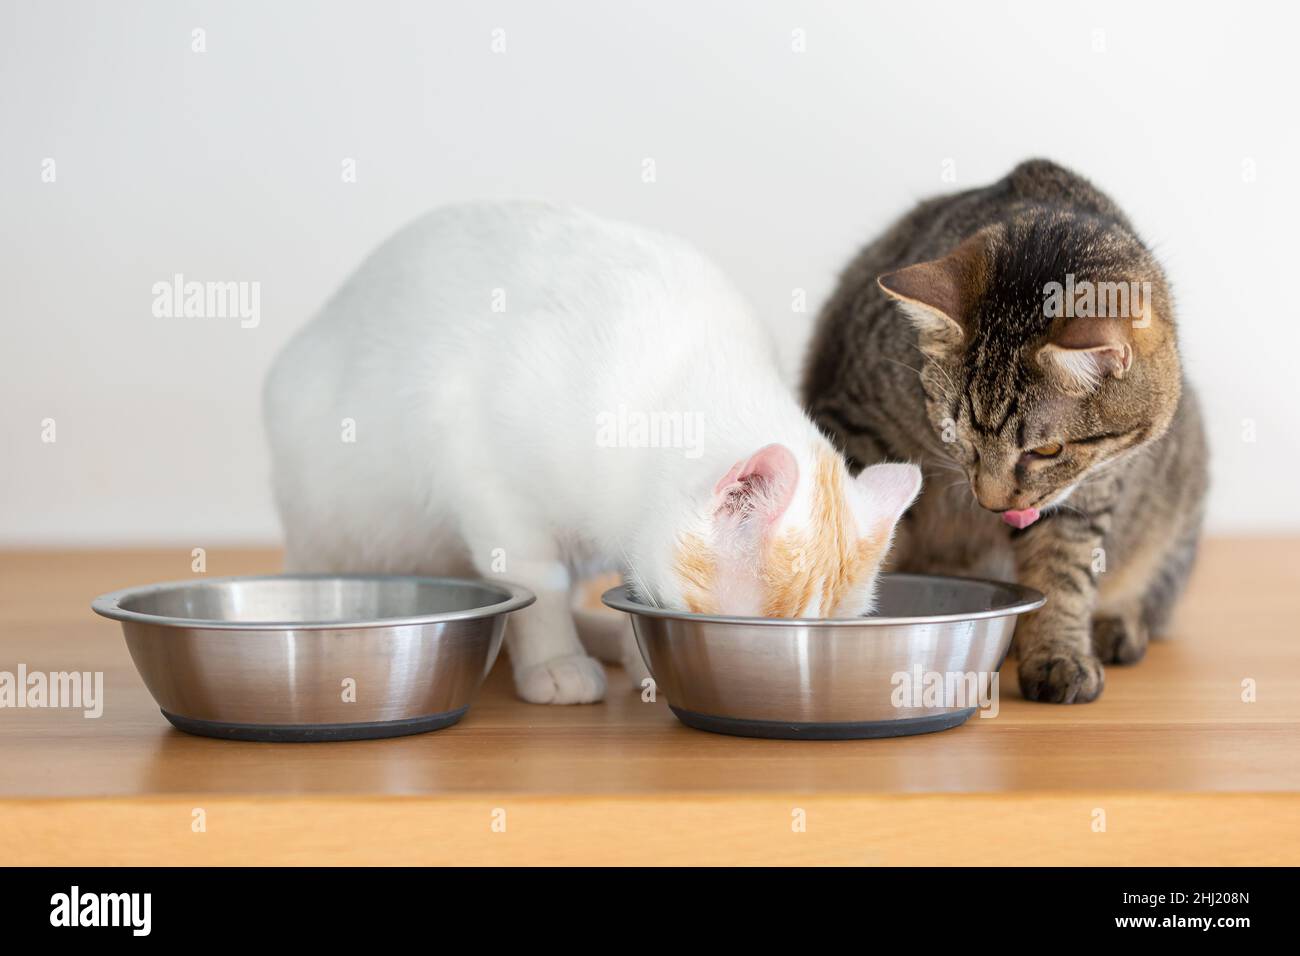 Two domesticated cats having a meal from two bowls Stock Photo